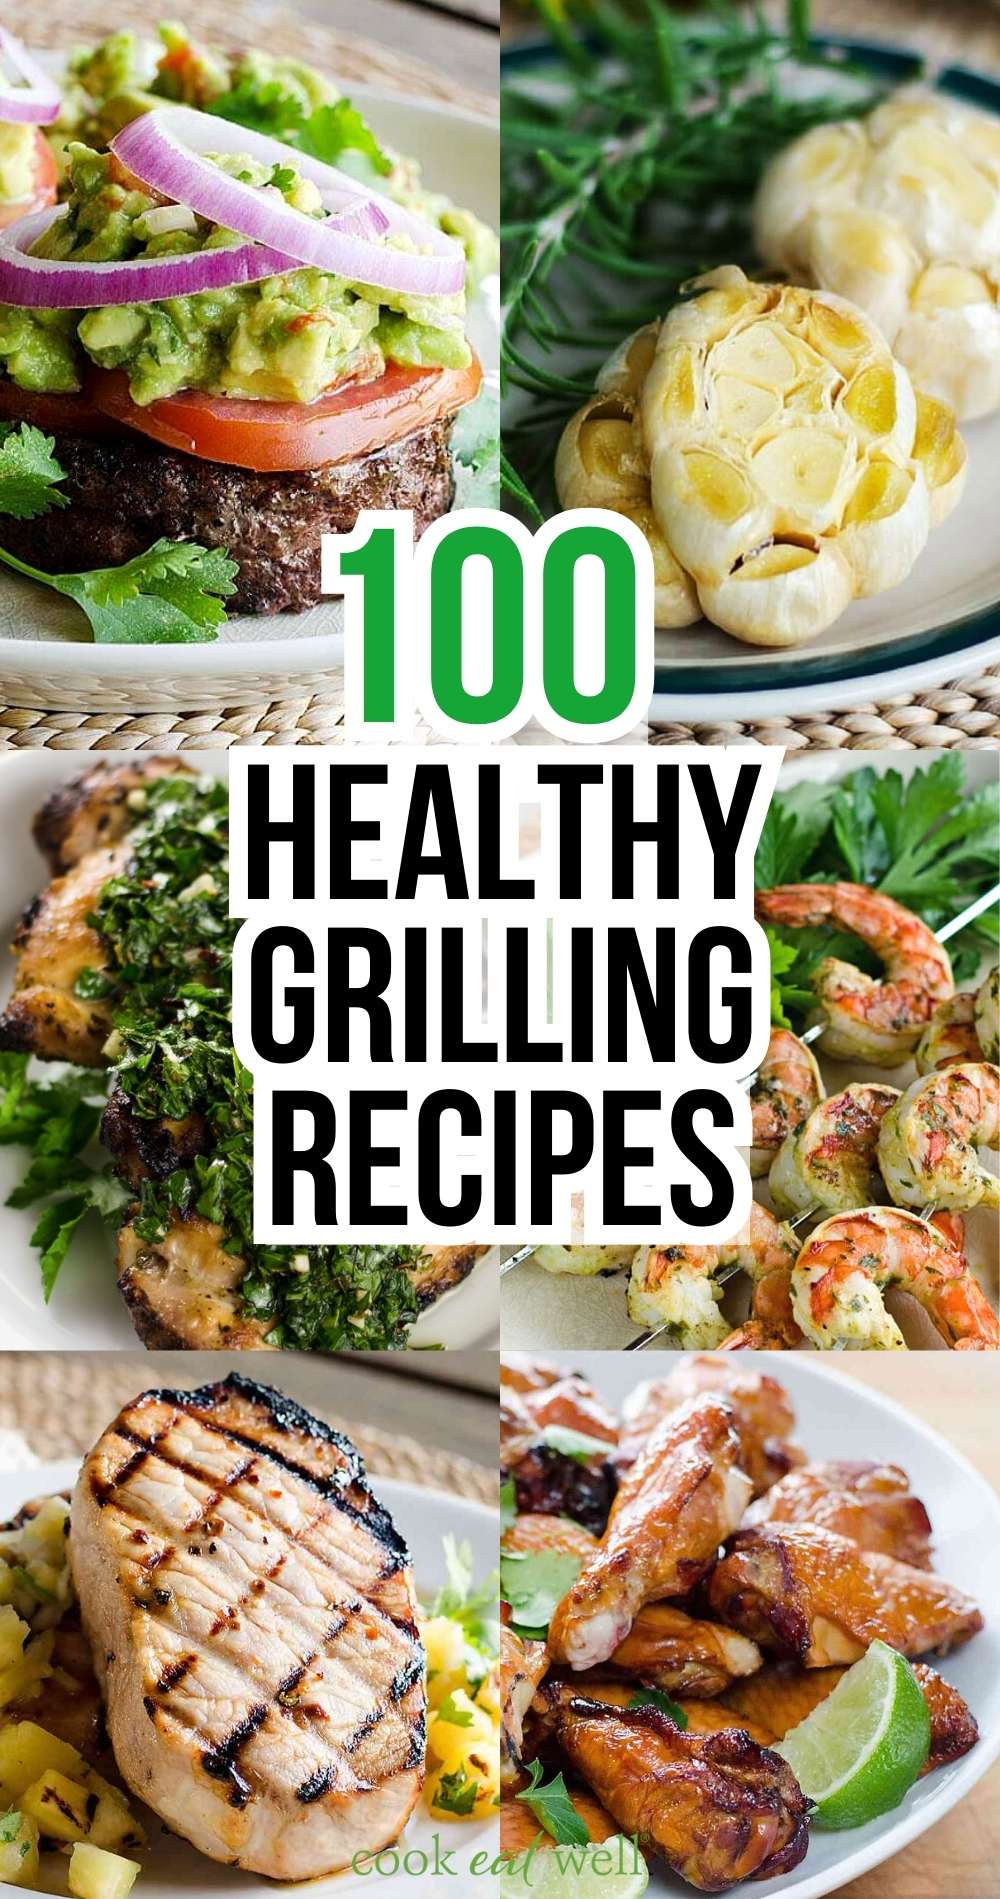 100 Easy Healthy Grilling Recipes To Make This Summer - Cook Eat Well